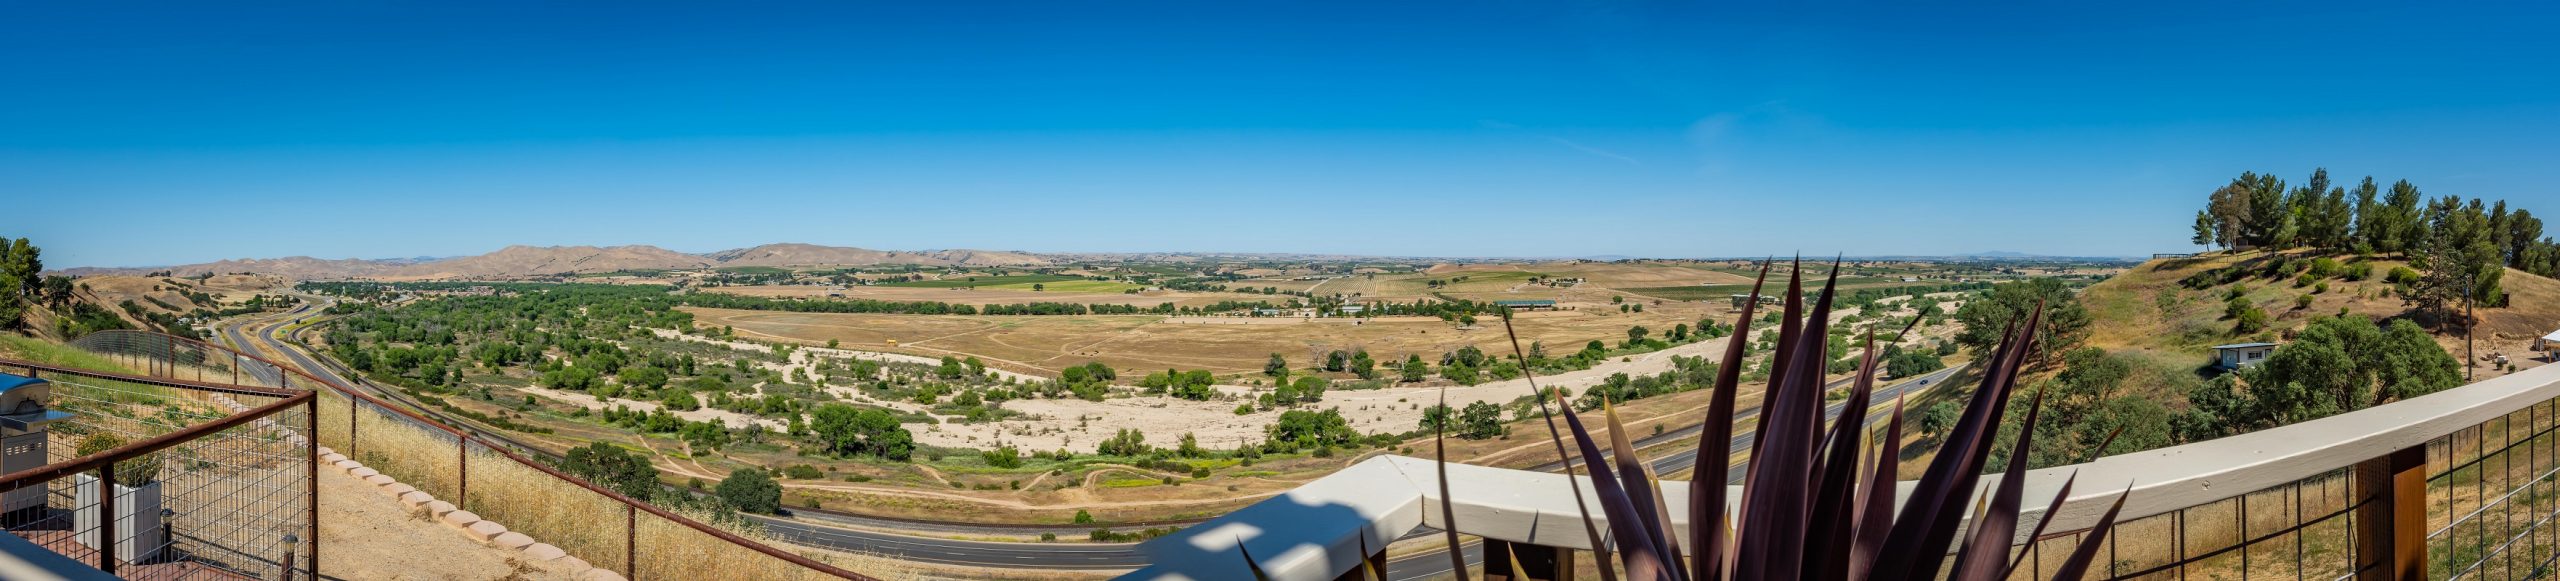 270 degrees of breathtaking views of vineyards and rolling hills.